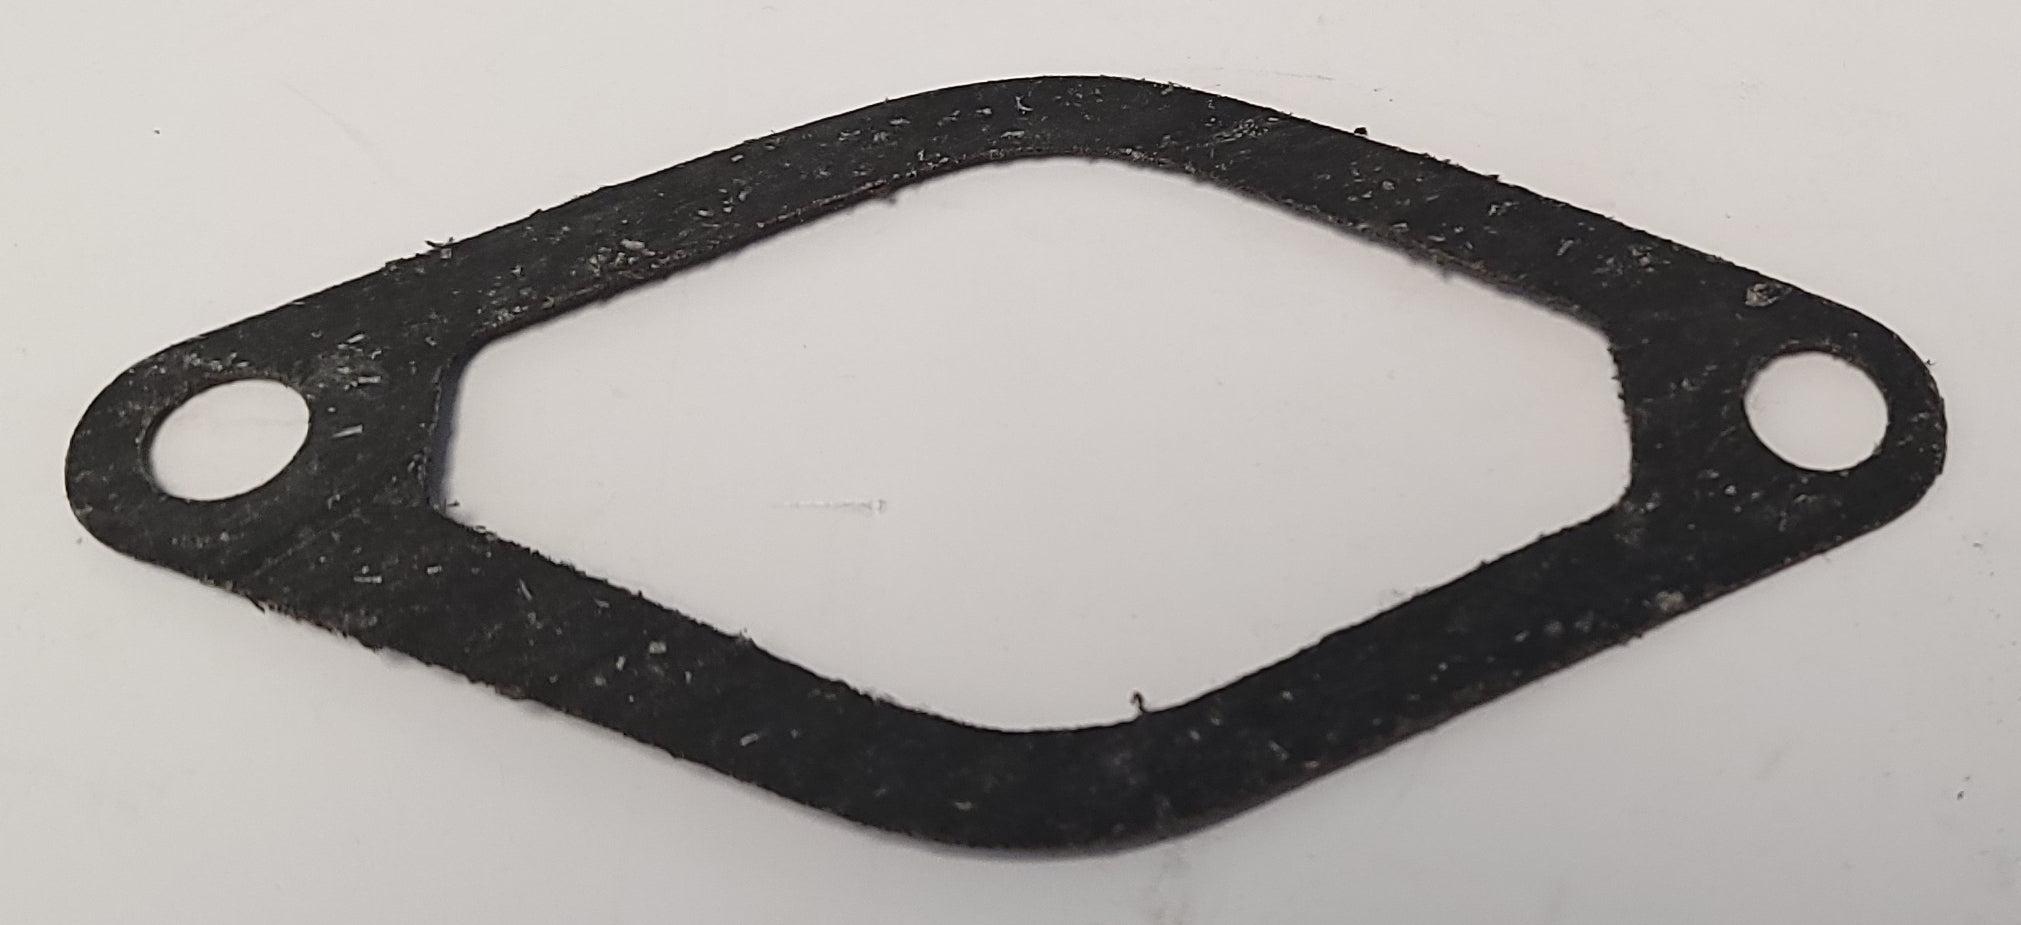 (NEW OLD STOCK)  201698- Cummins Water Transfer Connection Gasket